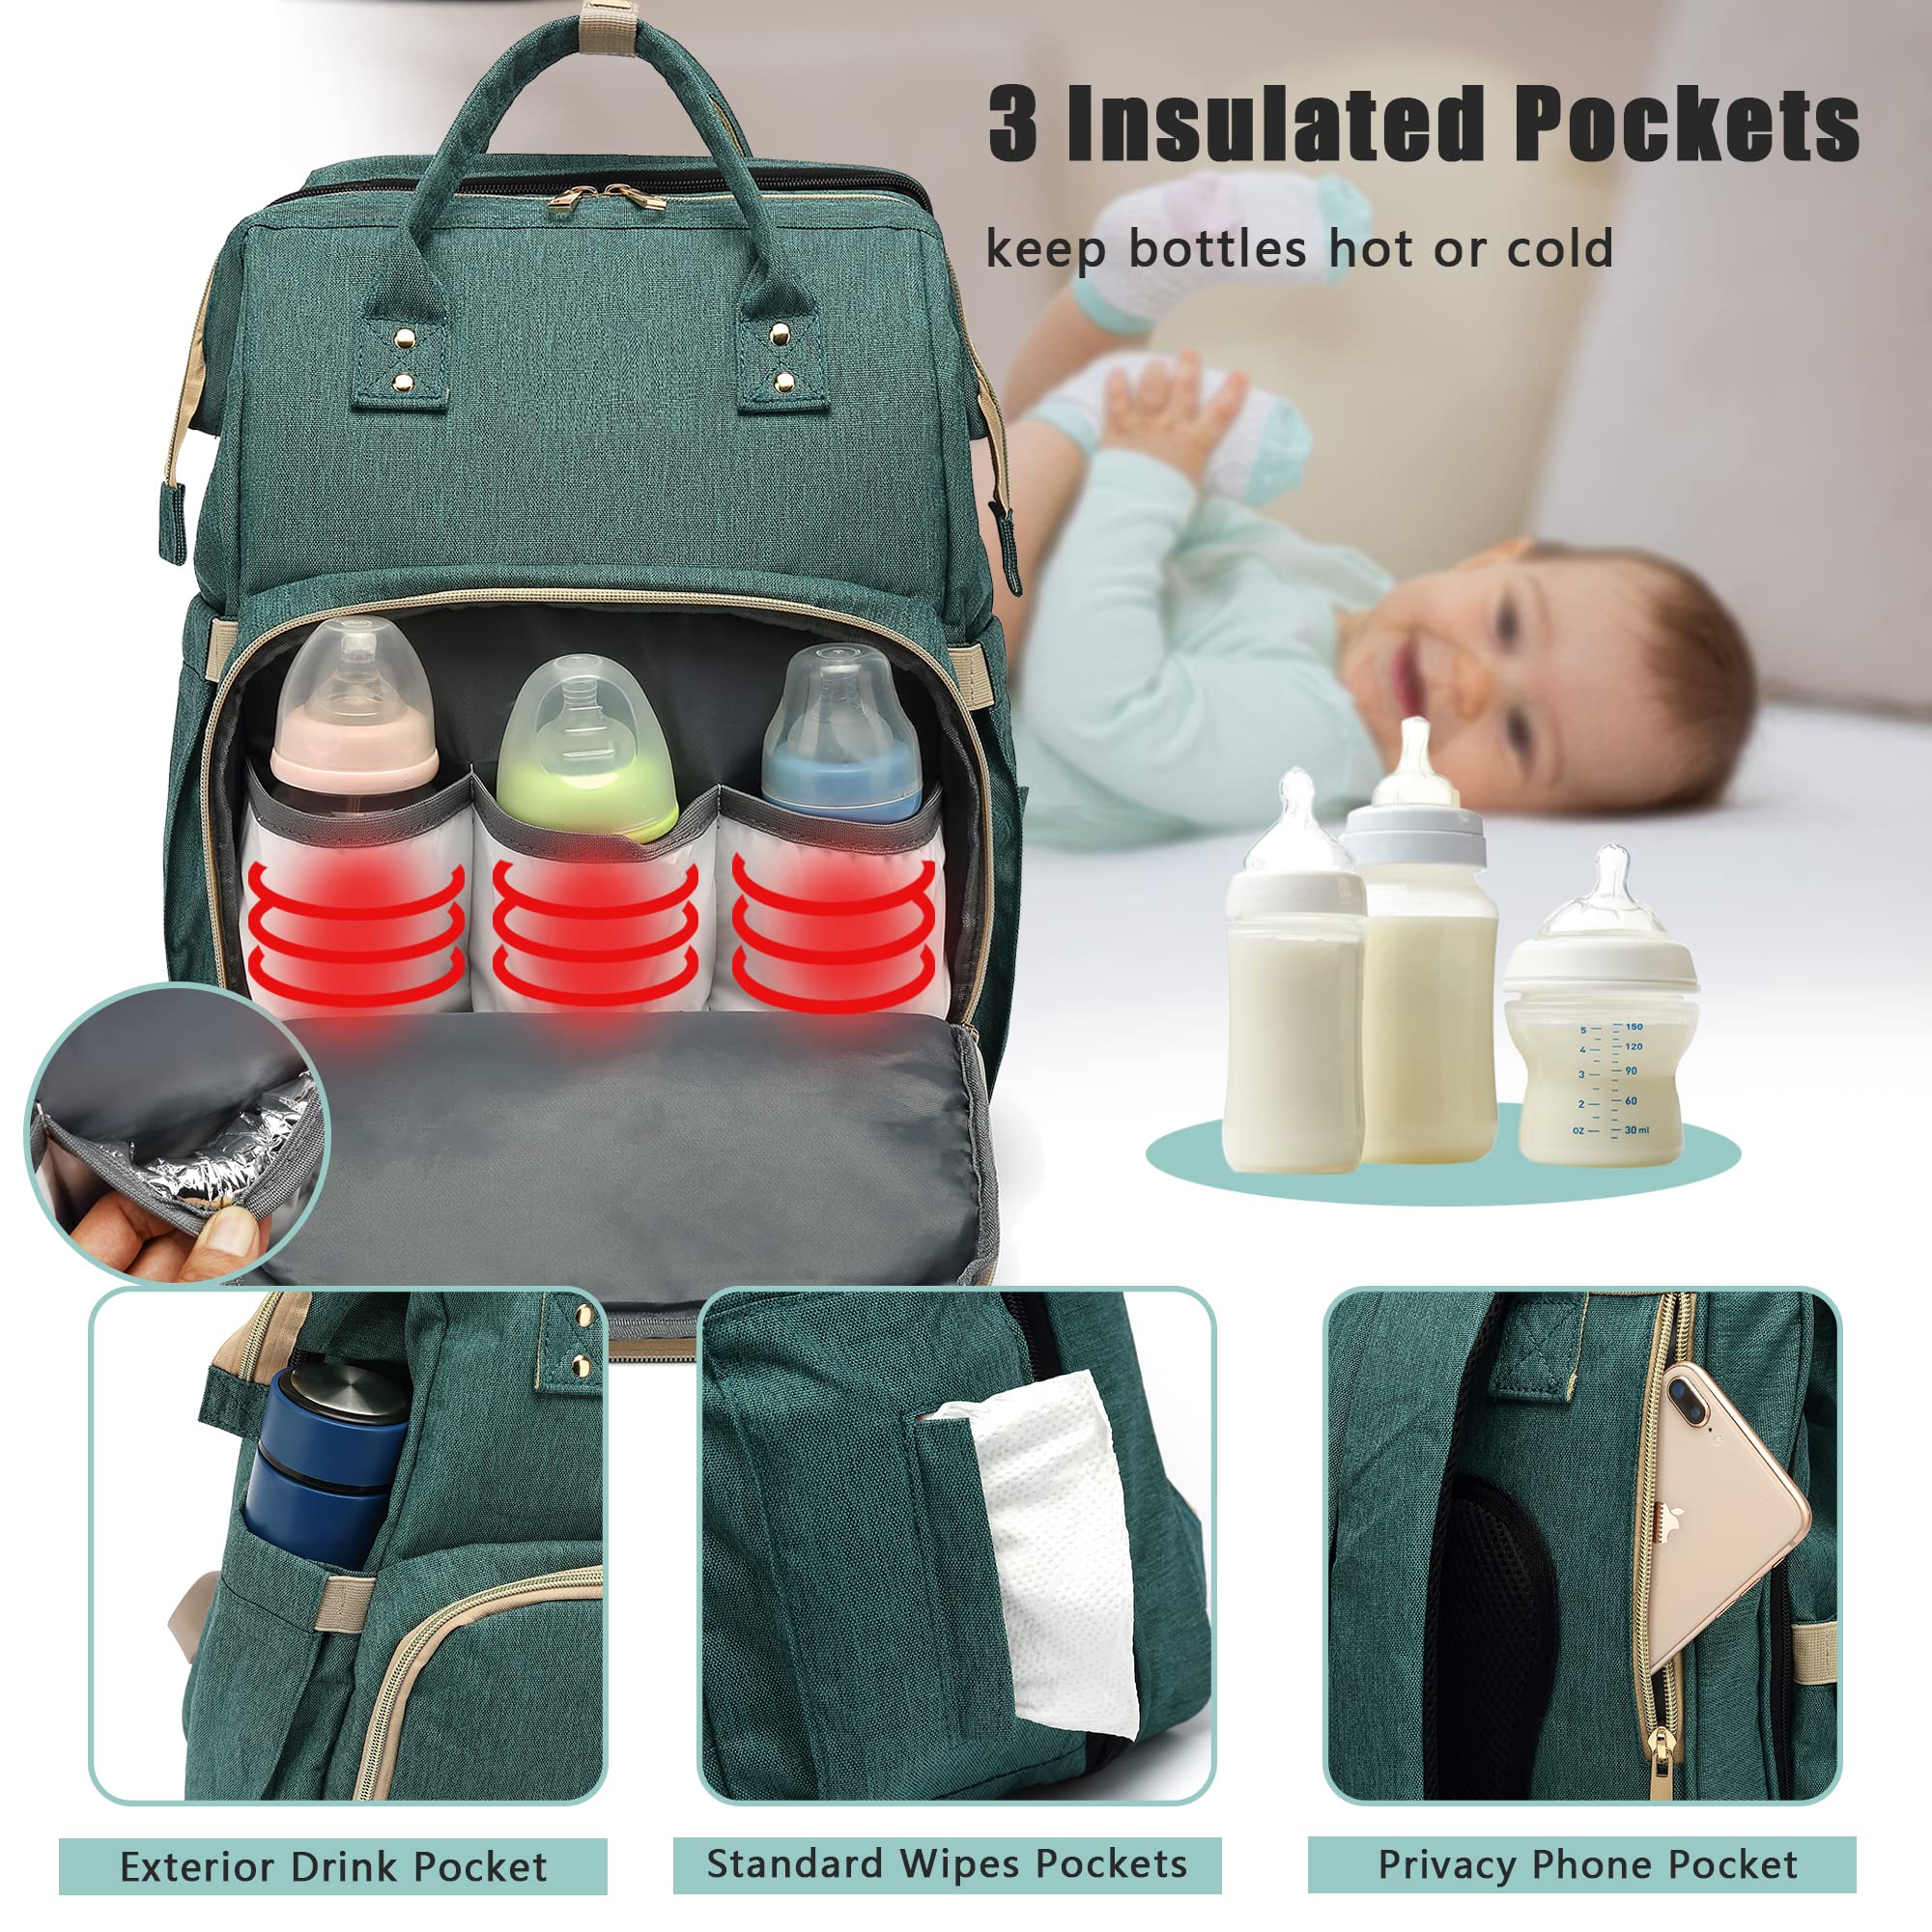 Baby Diaper Bag Backpack with Changing Station - Waterproof, Large 30L Capacity for Boy, Girl, Mom, Dad - Travel Baby Bag with Stroller Straps, Insulated Pockets - 16.5x9.4x14